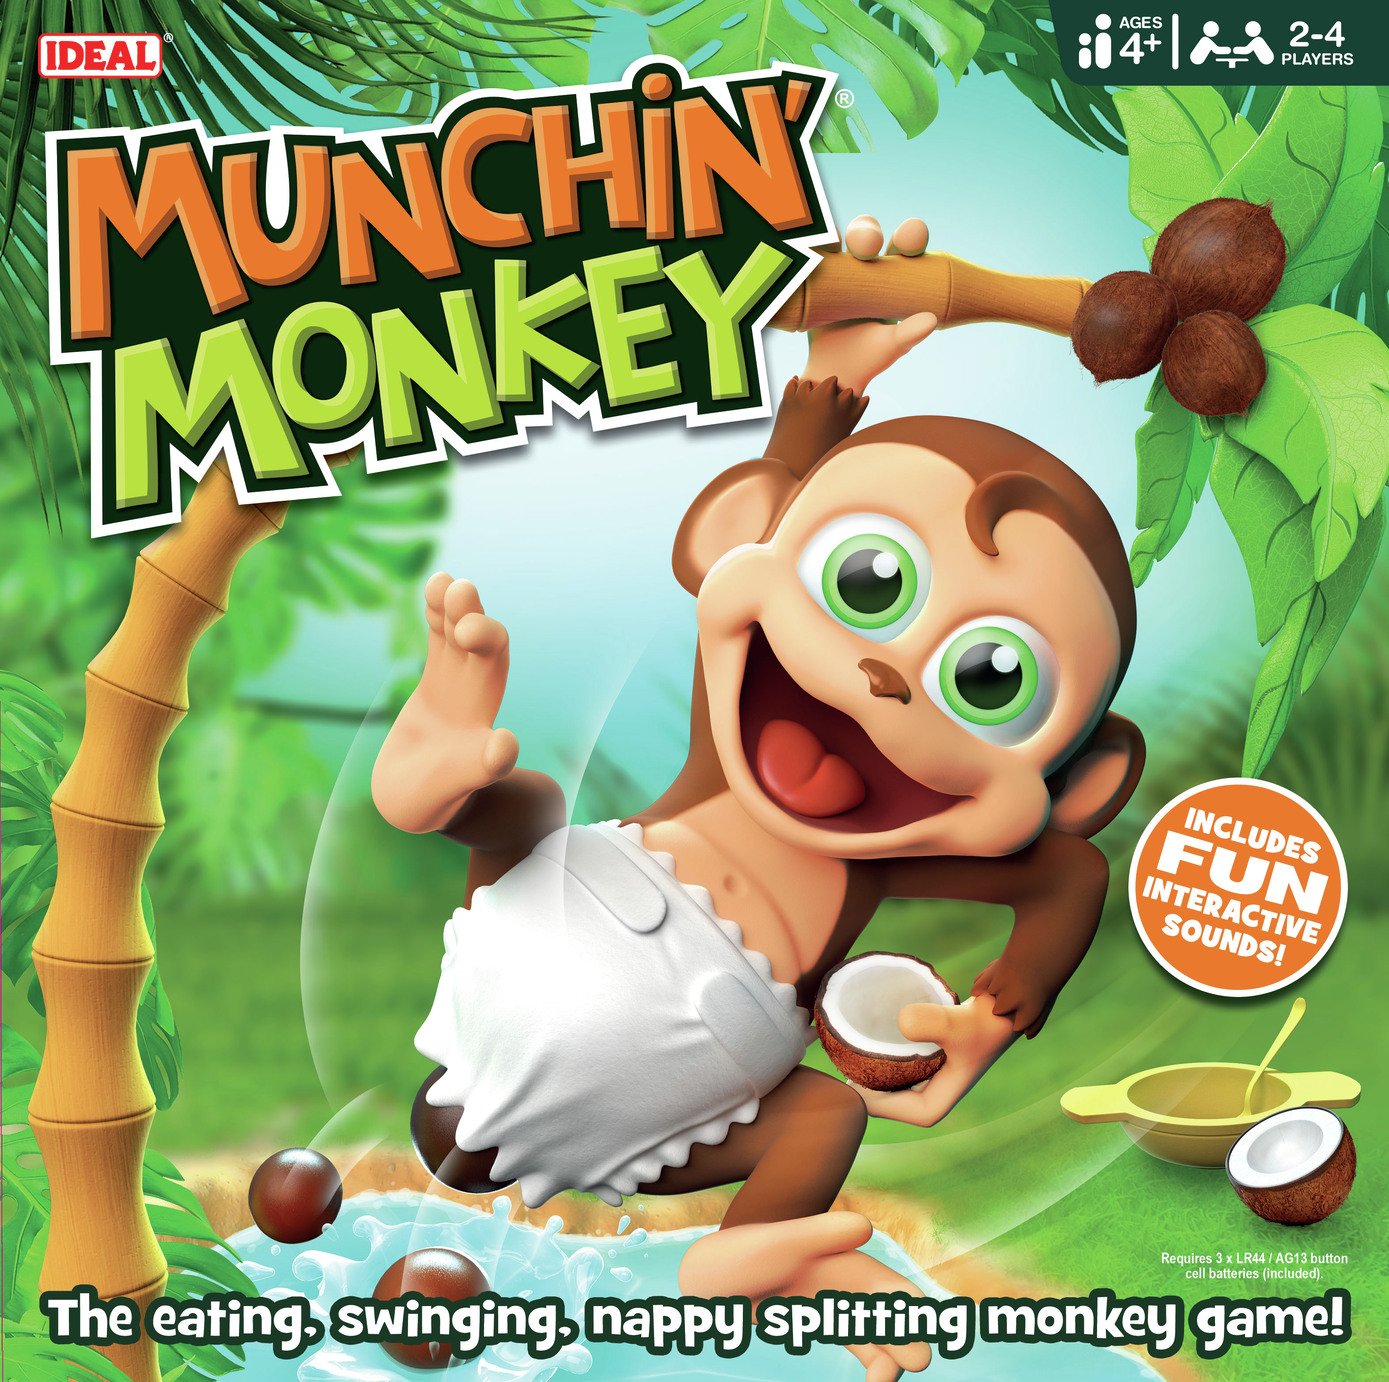 Ideal Munchin' Monkey Game Review